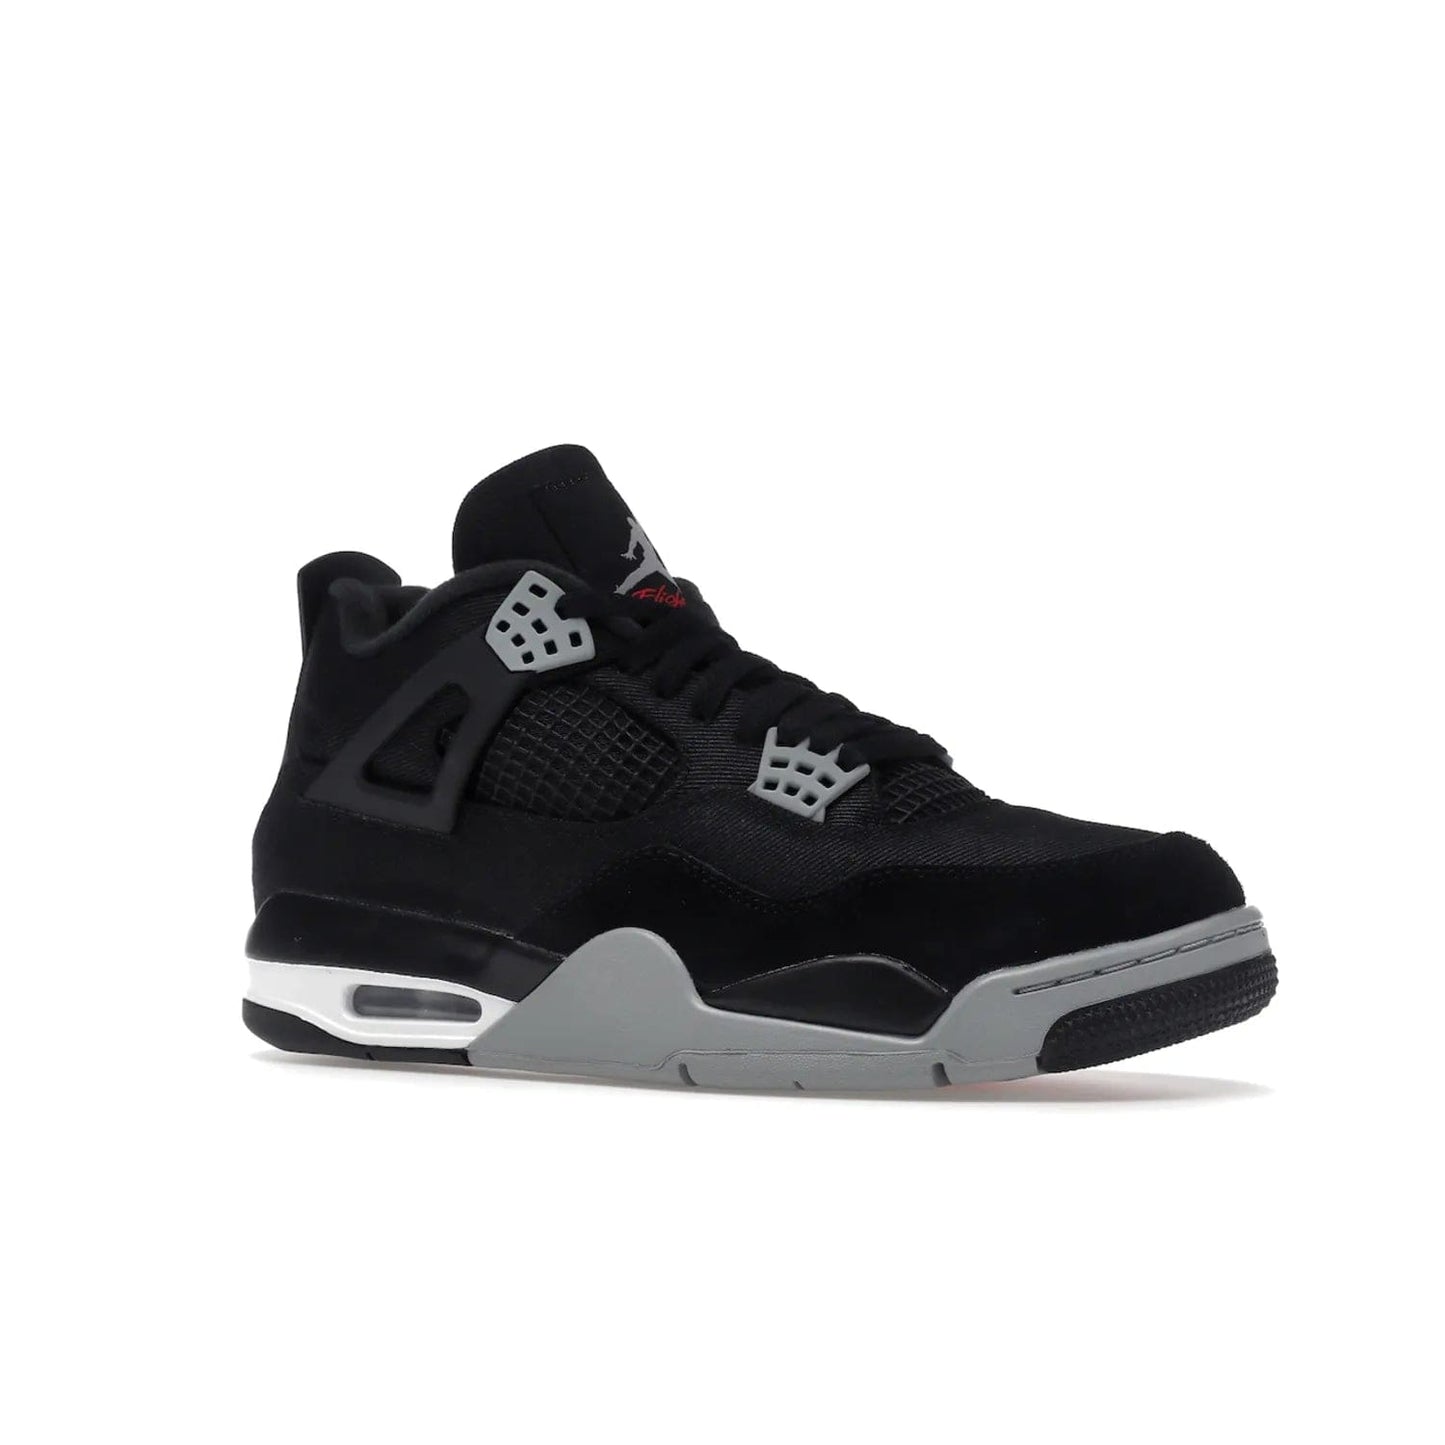 Jordan 4 Retro SE Black Canvas - Image 4 - Only at www.BallersClubKickz.com - The Air Jordan 4 Retro SE Black Canvas brings timeless style and modern luxury. Classic mid-top sneaker in black canvas and grey suede with tonal Jumpman logo, Flight logo and polyurethane midsole with visible Air-sole cushioning. Refresh your sneaker collection and rock the Air Jordan 4 Retro SE Black Canvas.